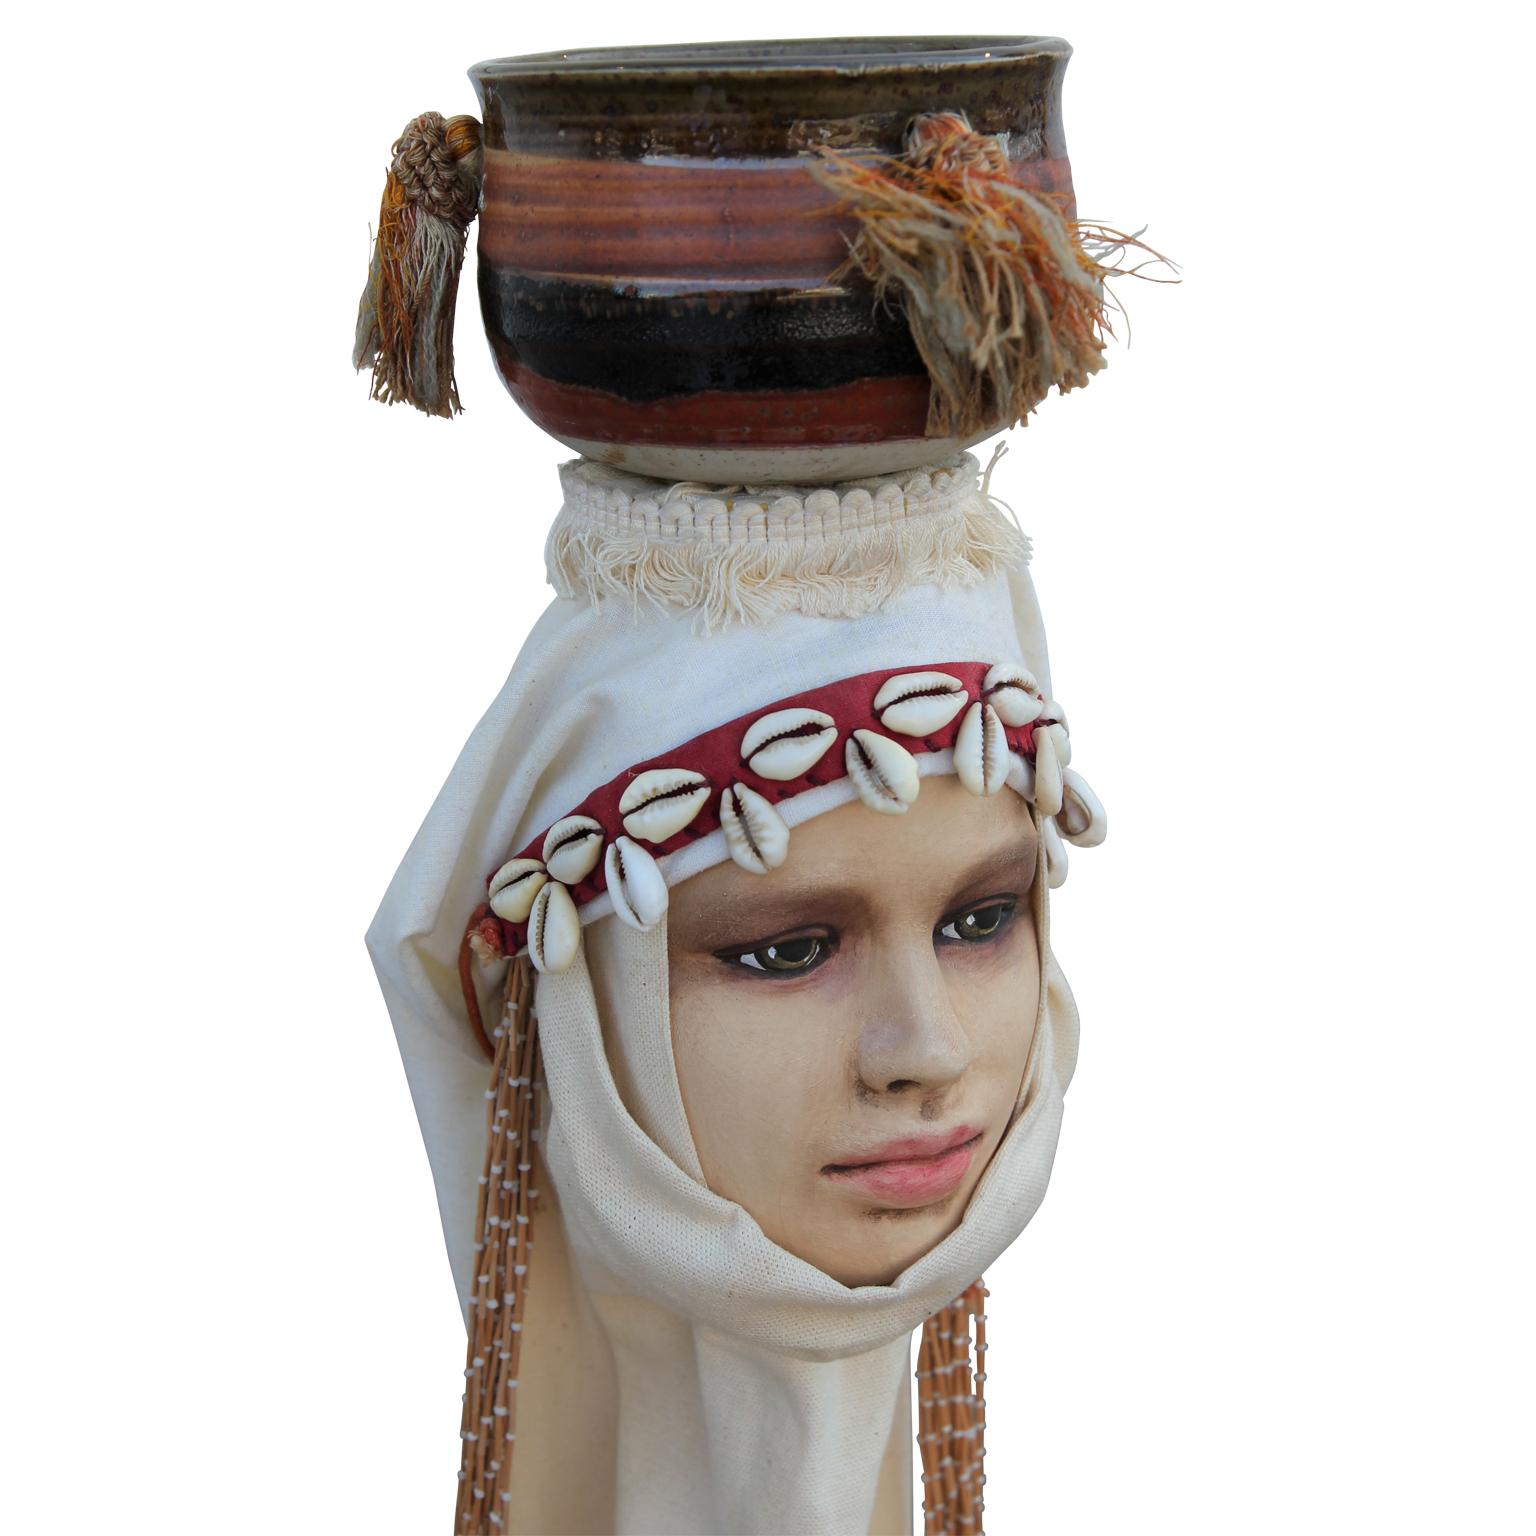 Mixed Media Sculpture of Female with Ceramic Pot on Head  - Gray Figurative Sculpture by Wesley F. Walberg